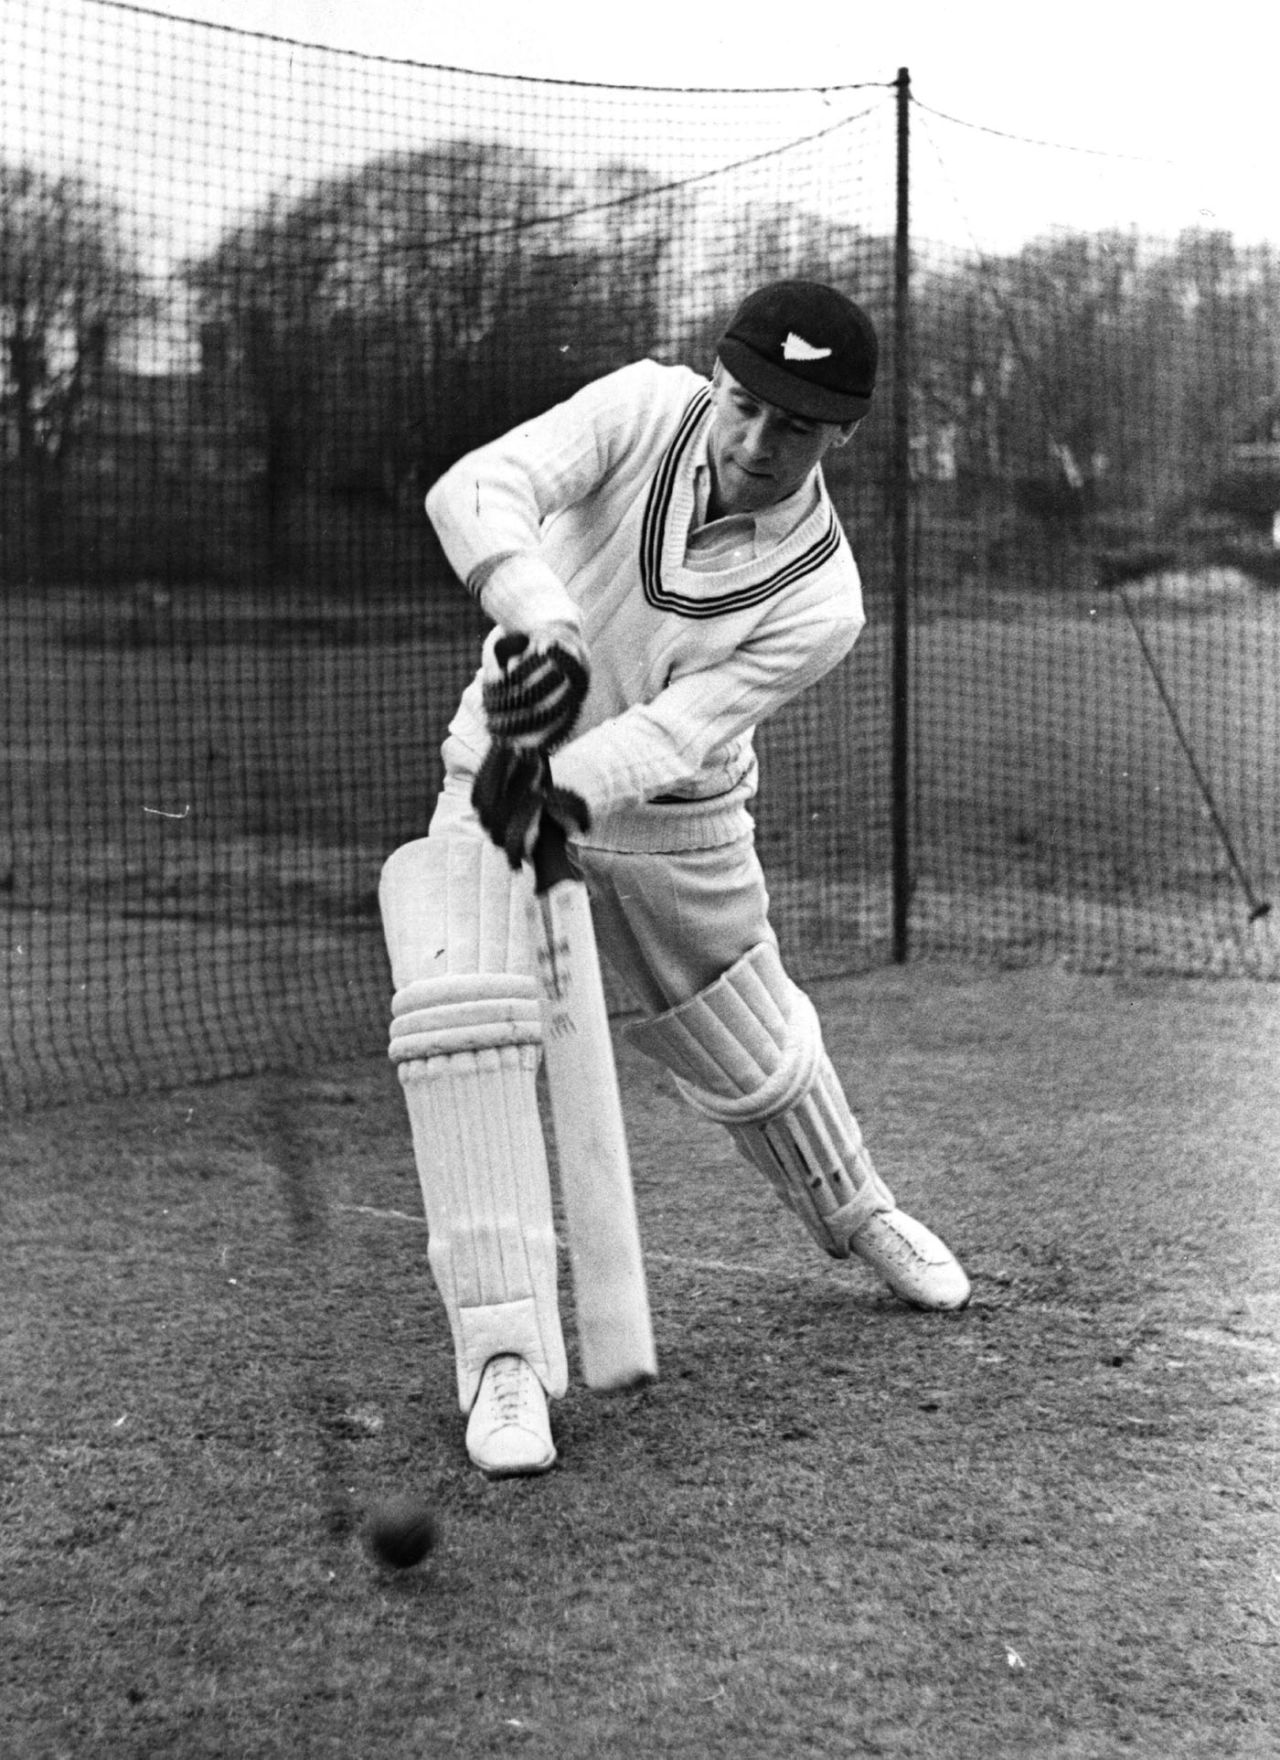 Martin Donnelly batting in the nets on New Zealand's 1949 tour, May 7, 1949